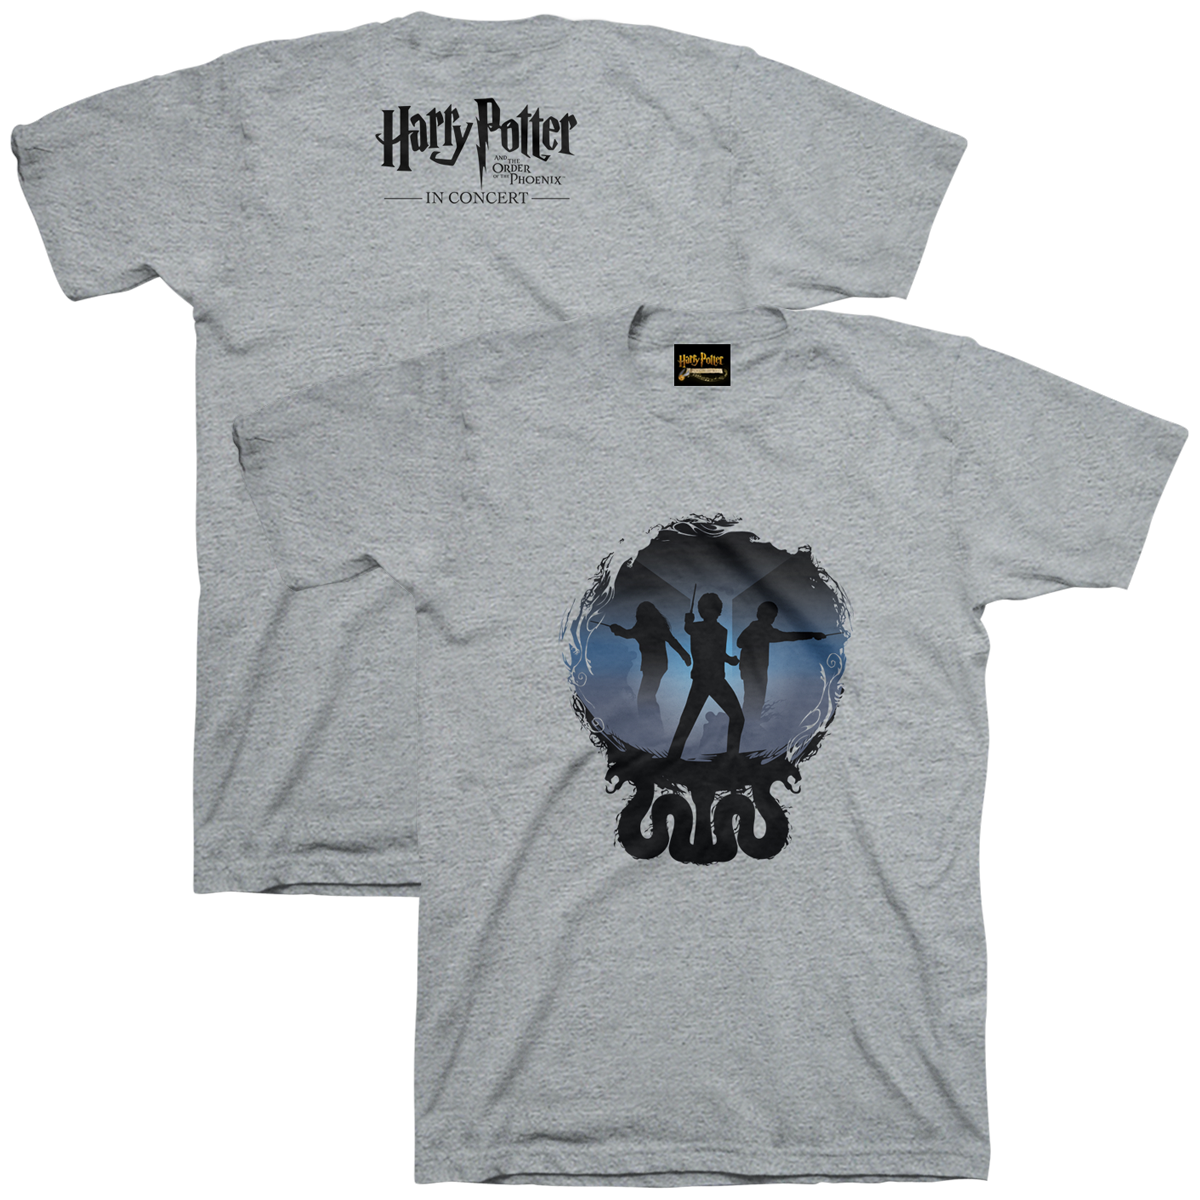 "Prophecy" T-Shirt (from Harry Potter and the Order of the Phoenix™ in Concert)